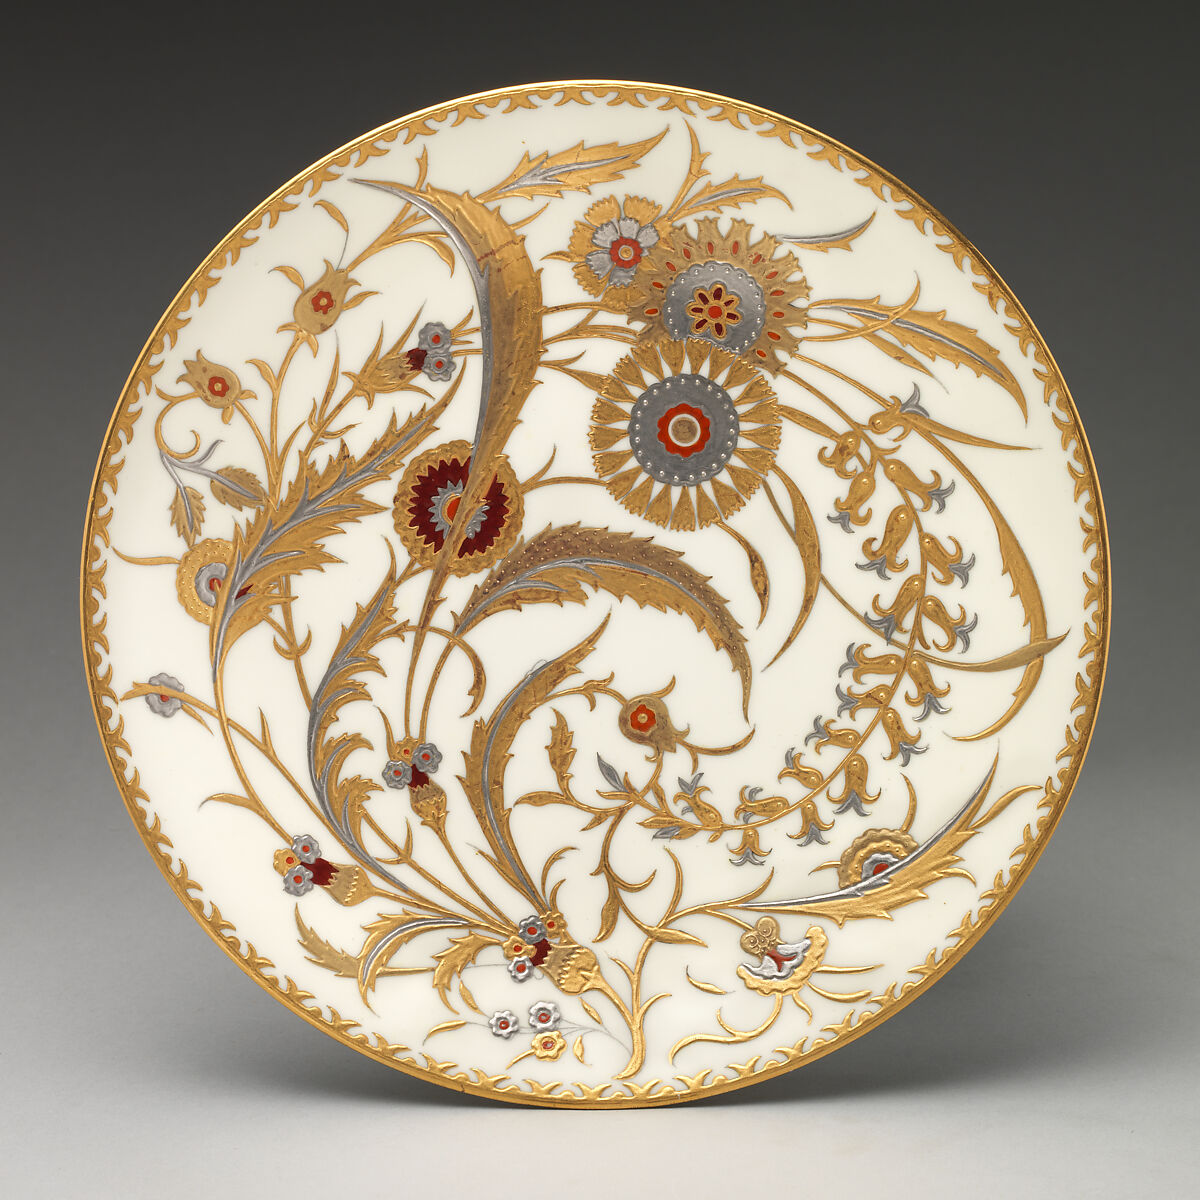 Plate with Isnik floral and foliate pattern, Minton(s) (British, Stoke-on-Trent, 1793–present), Bone China, British, Stoke-on-Trent, Staffordshire 